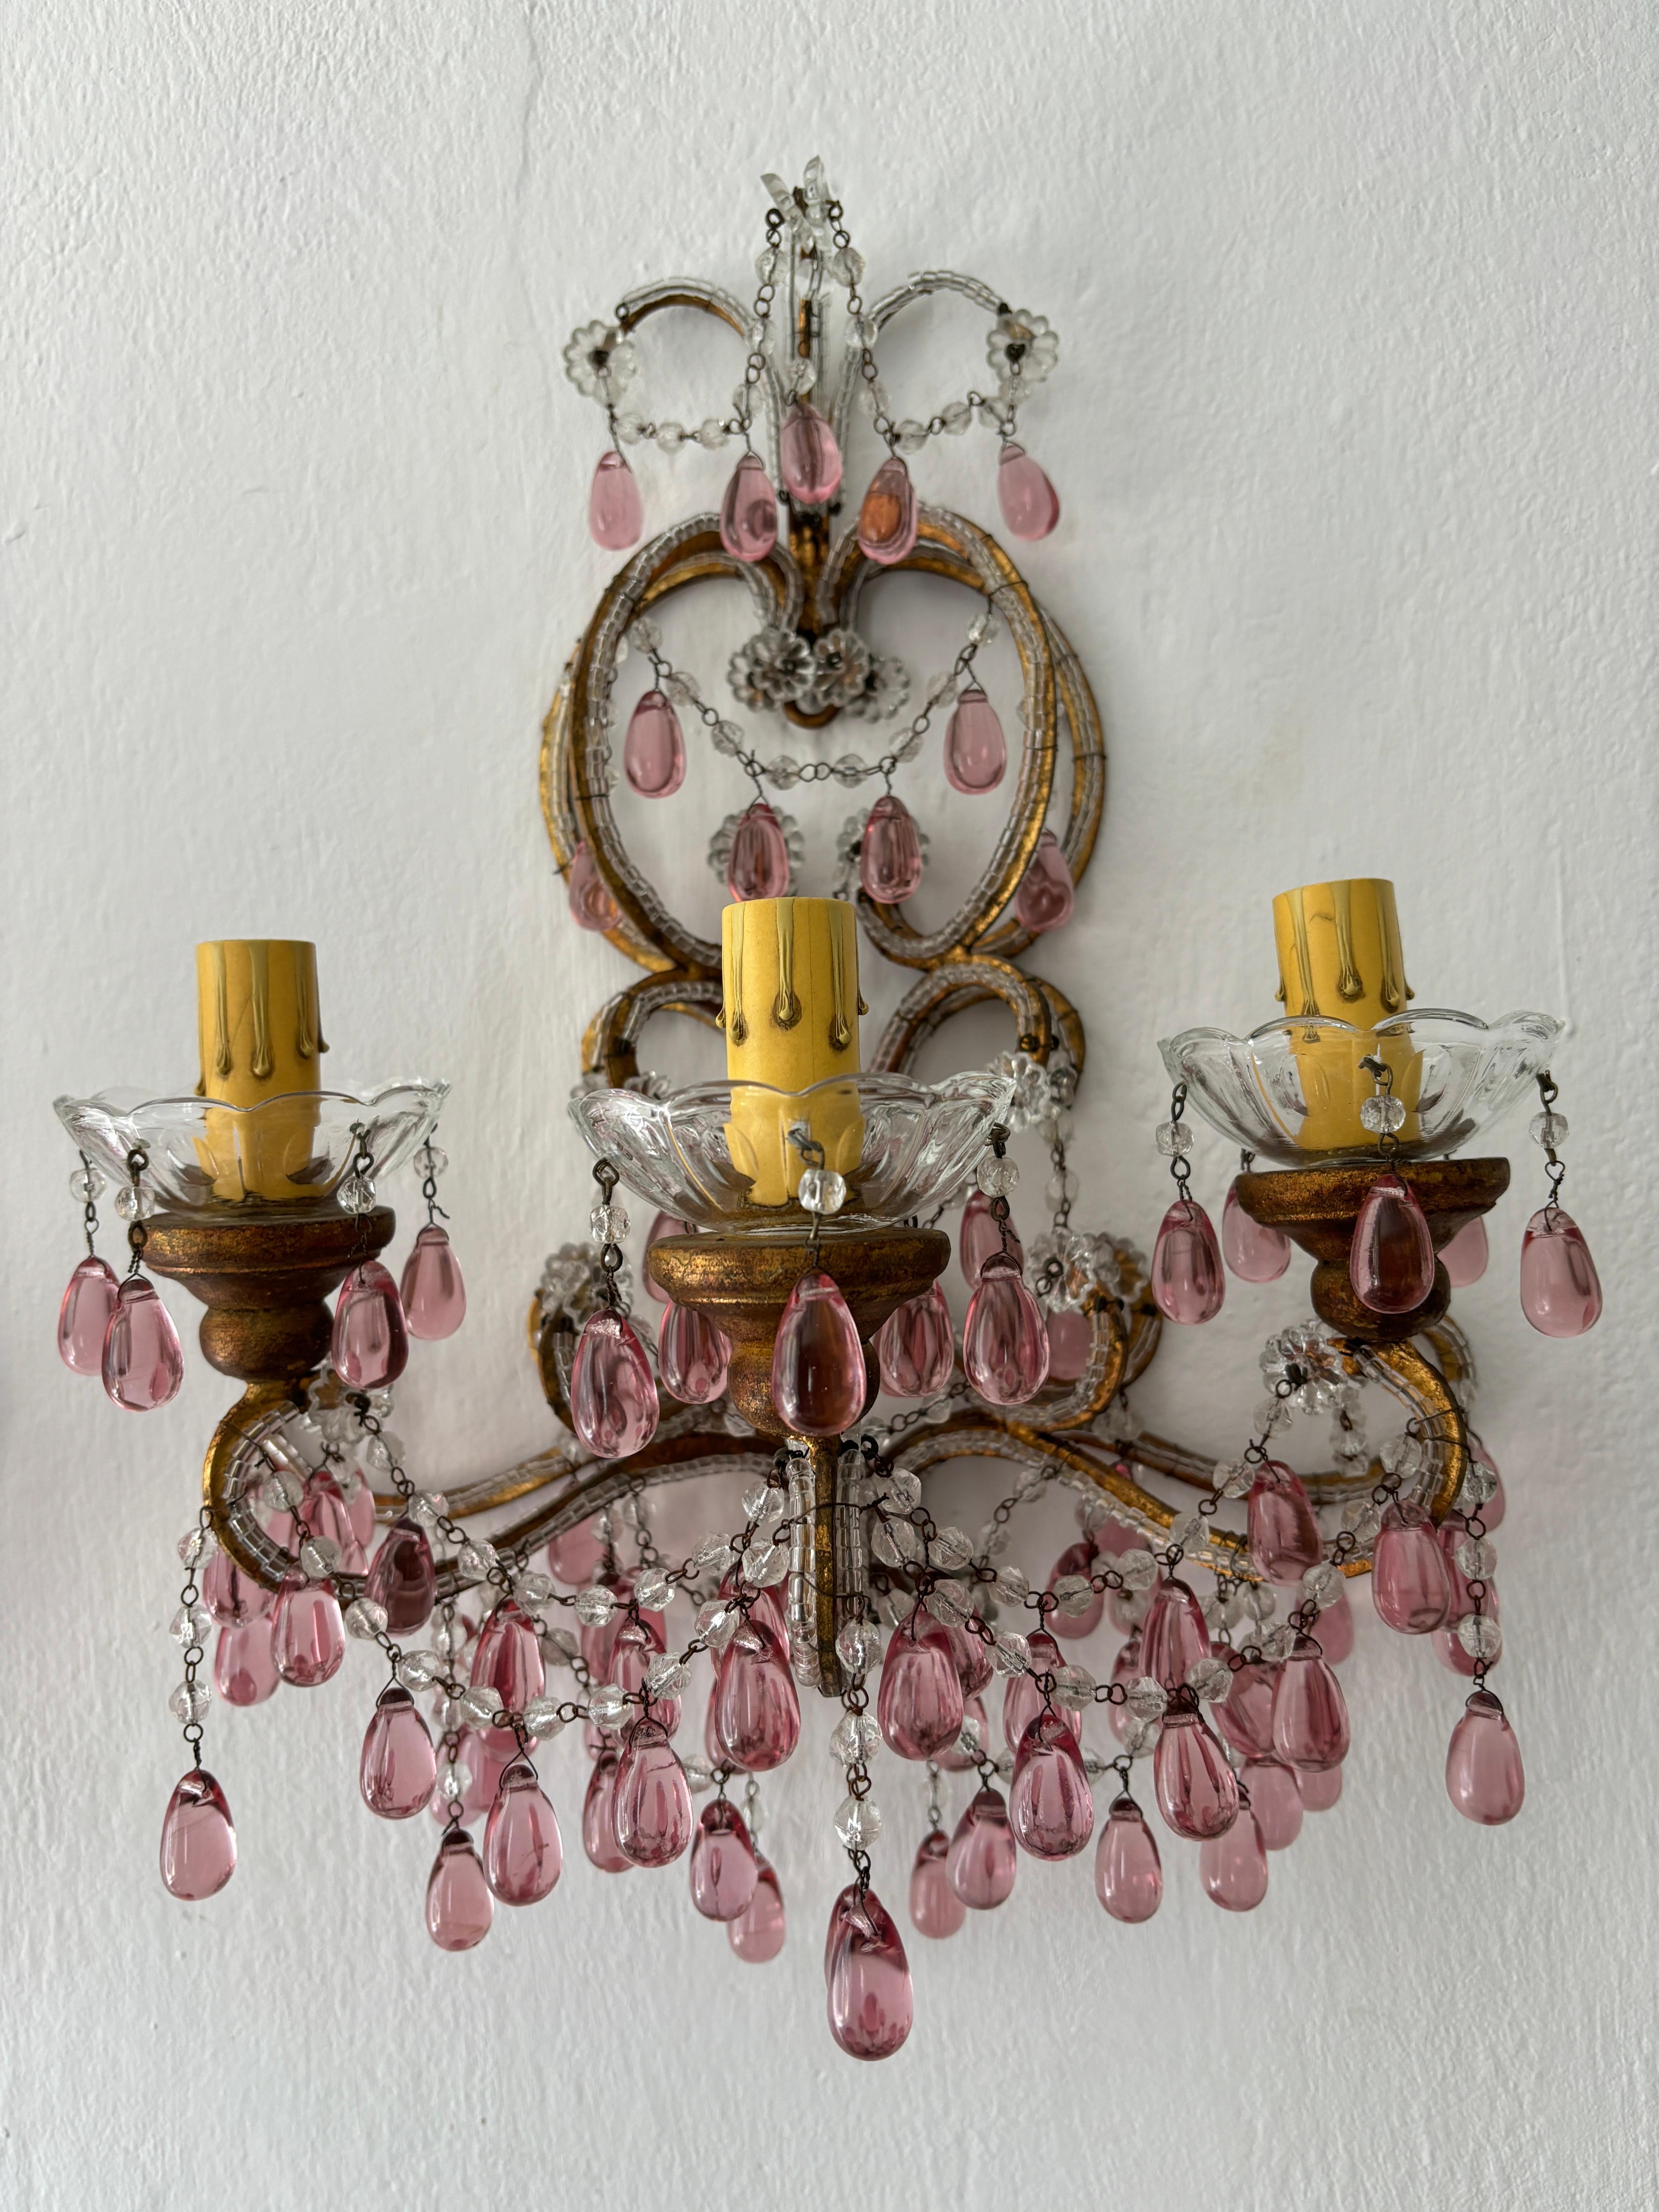 Early 20th Century c 1900 French Beaded Extremely Rare Cranberry Pink Murano Drops Loaded Sconces For Sale